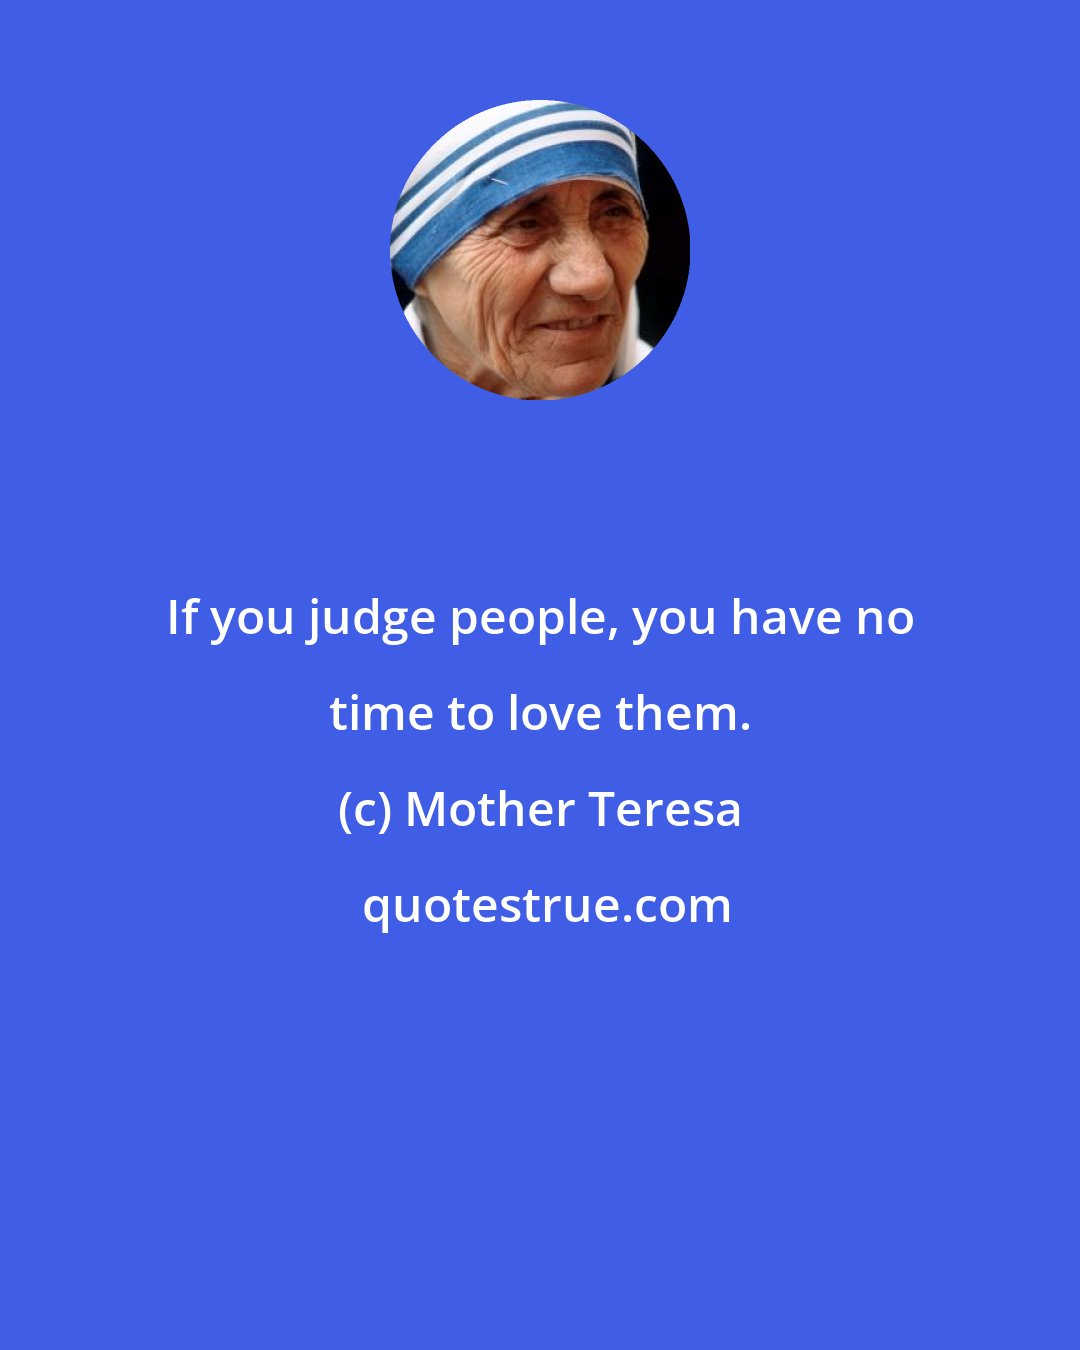 Mother Teresa: If you judge people, you have no time to love them.